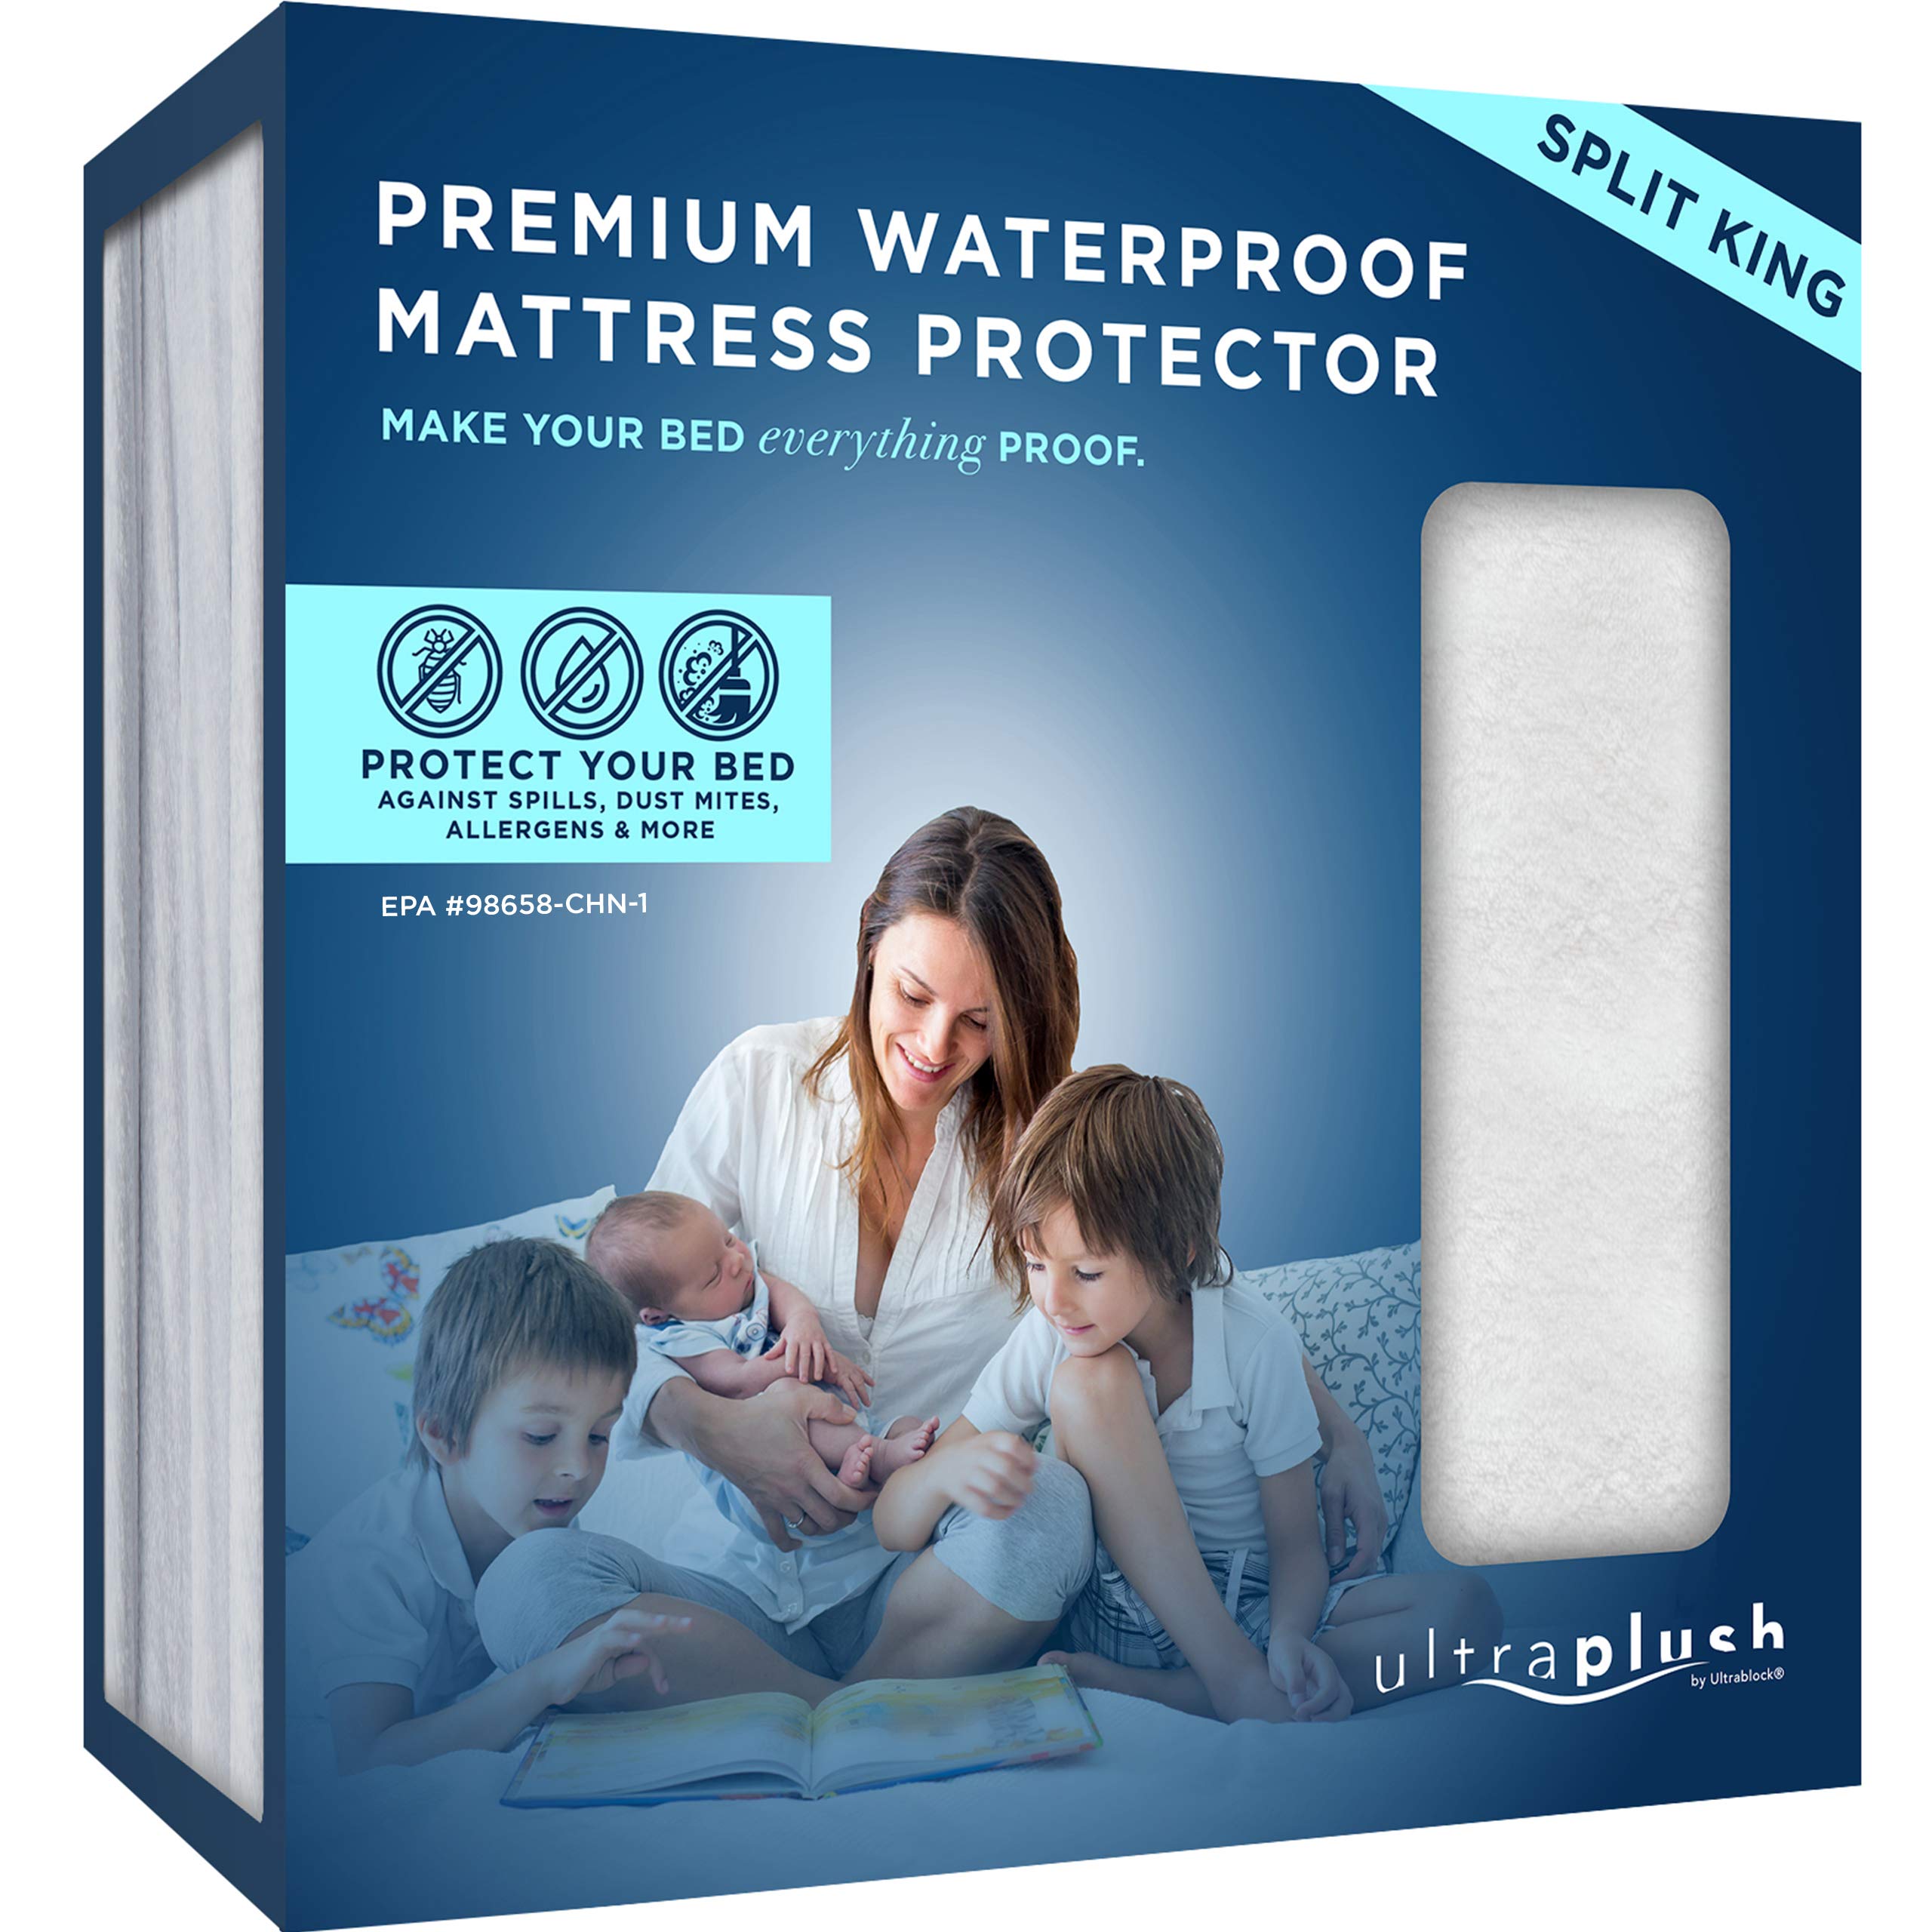 Book Cover UltraBlock Ultra Plush Premium Waterproof Mattress Protector (Split King) – Ultra Soft, Breathable, Vinyl Free, Noiseless Mattress Cover, Fitted Style with Deep Pockets (15-18